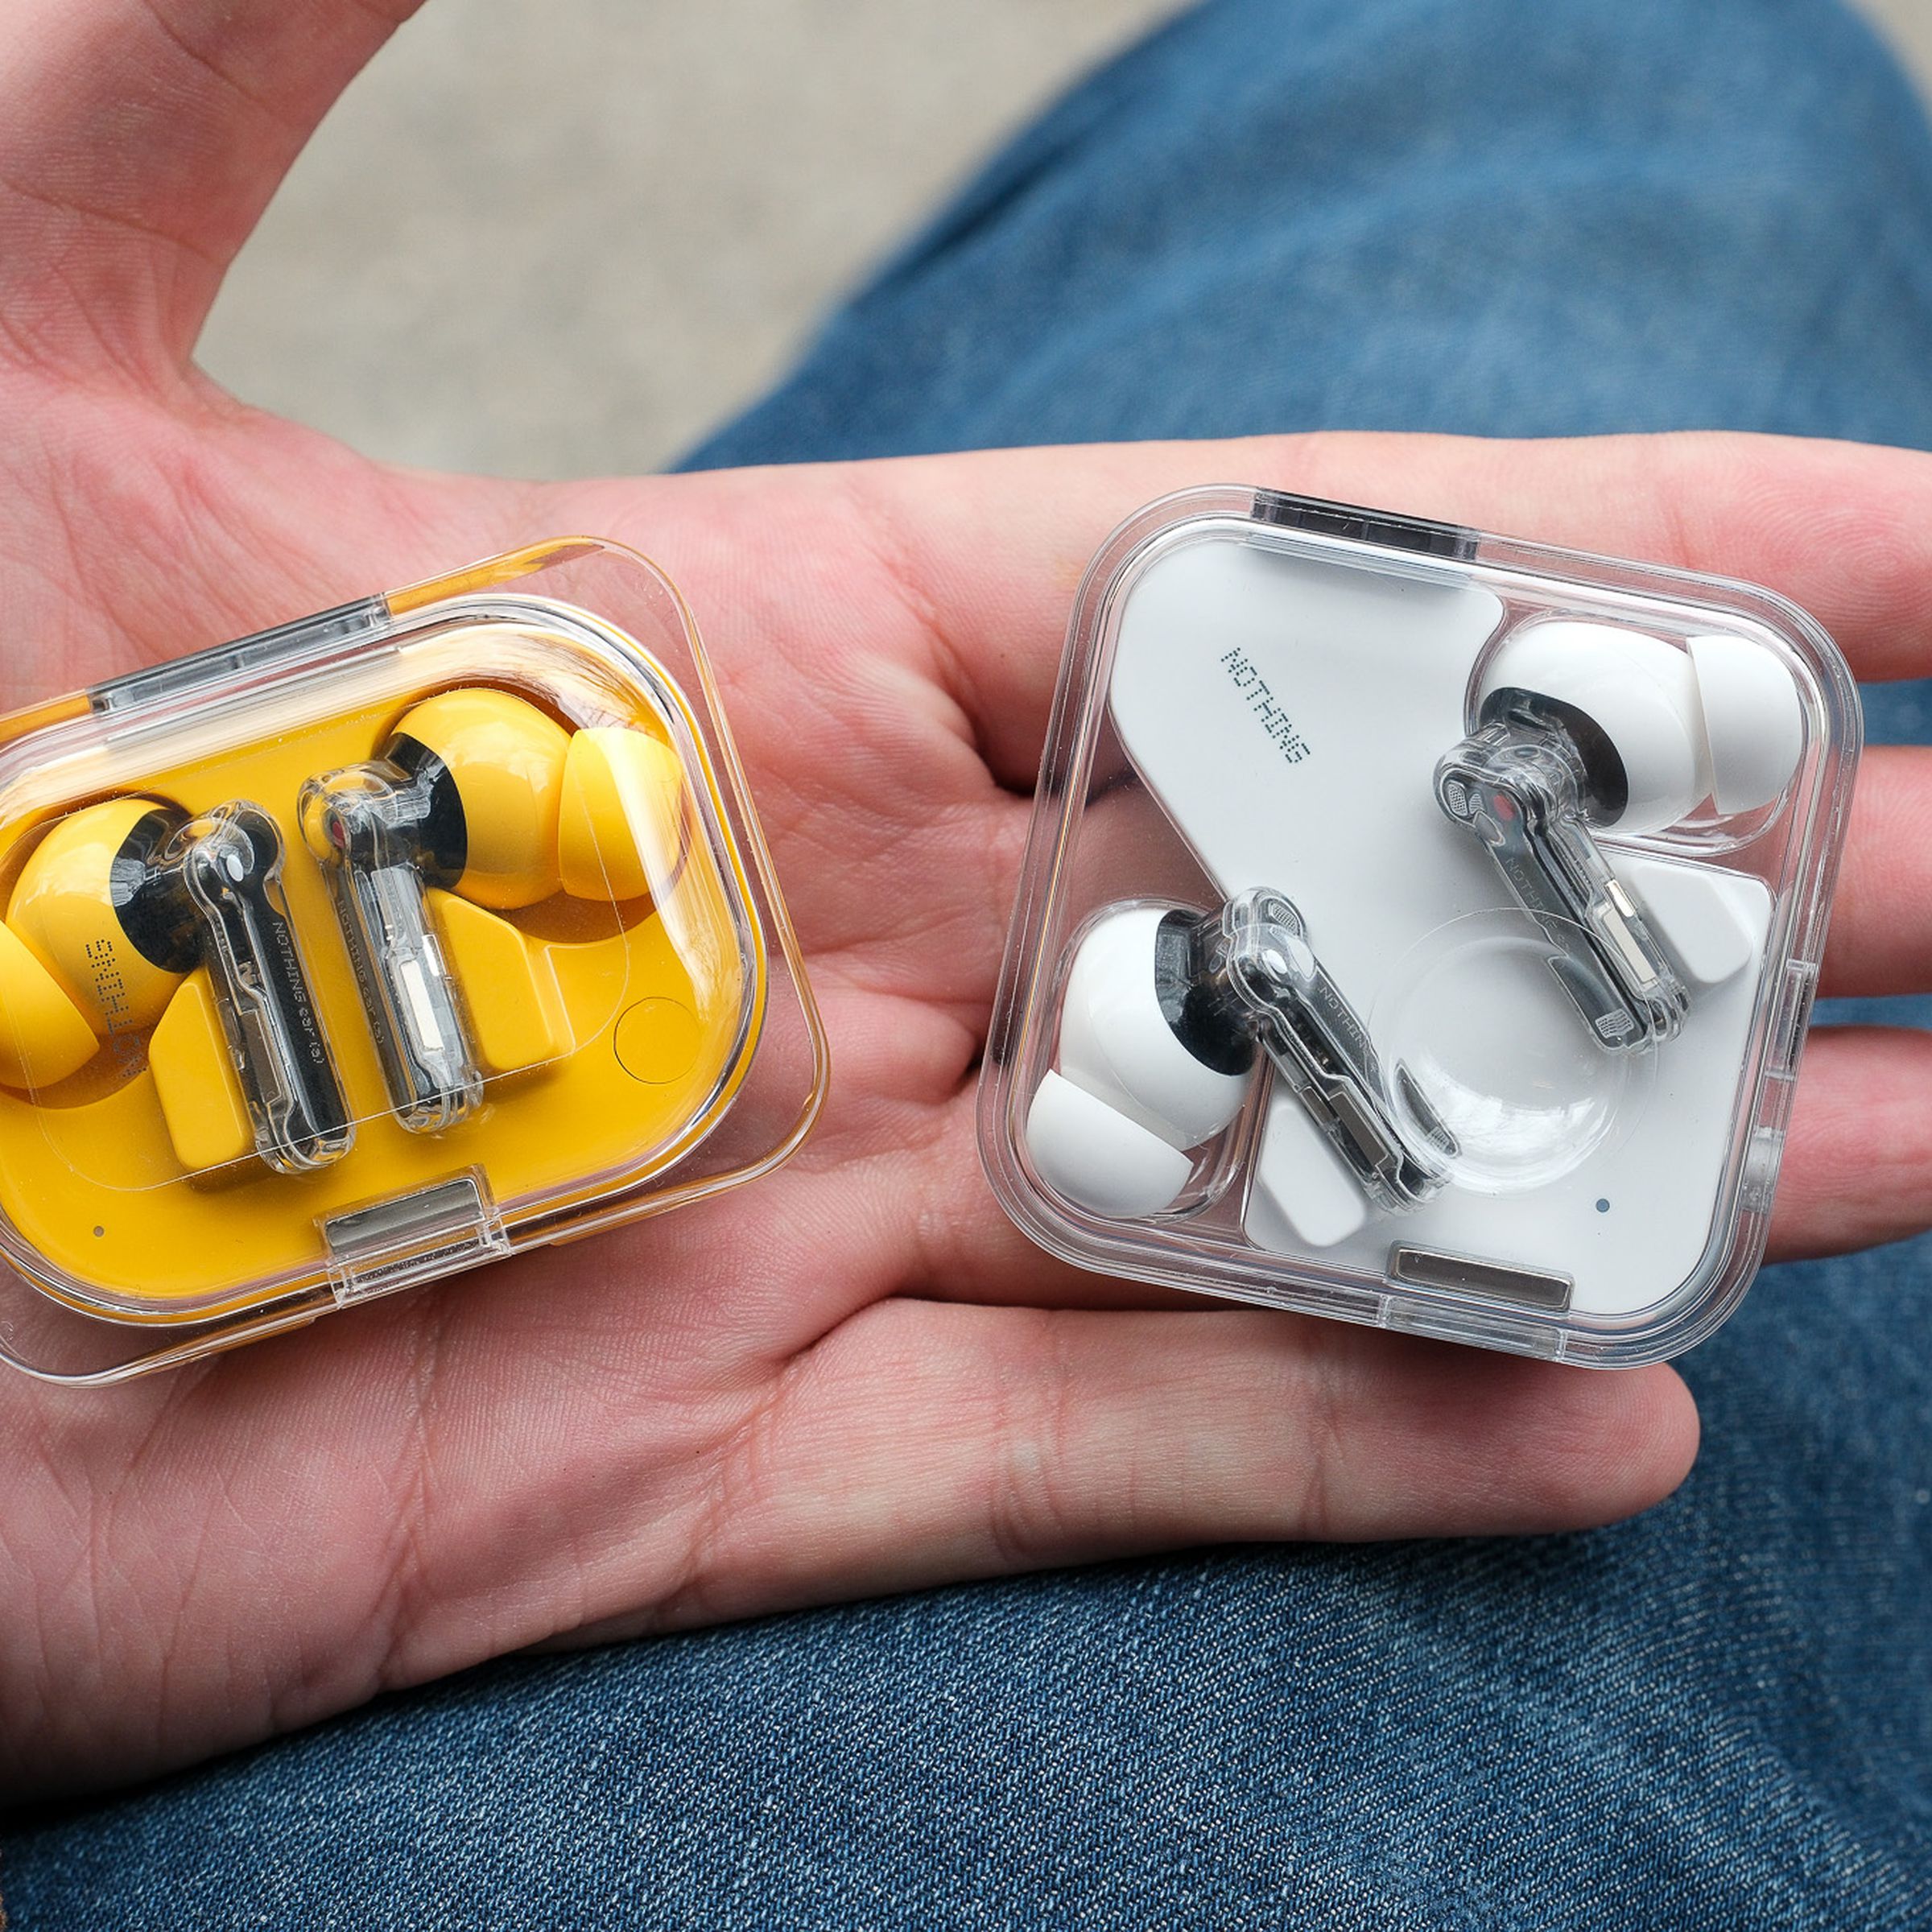 A photo of new earbuds from Nothing.